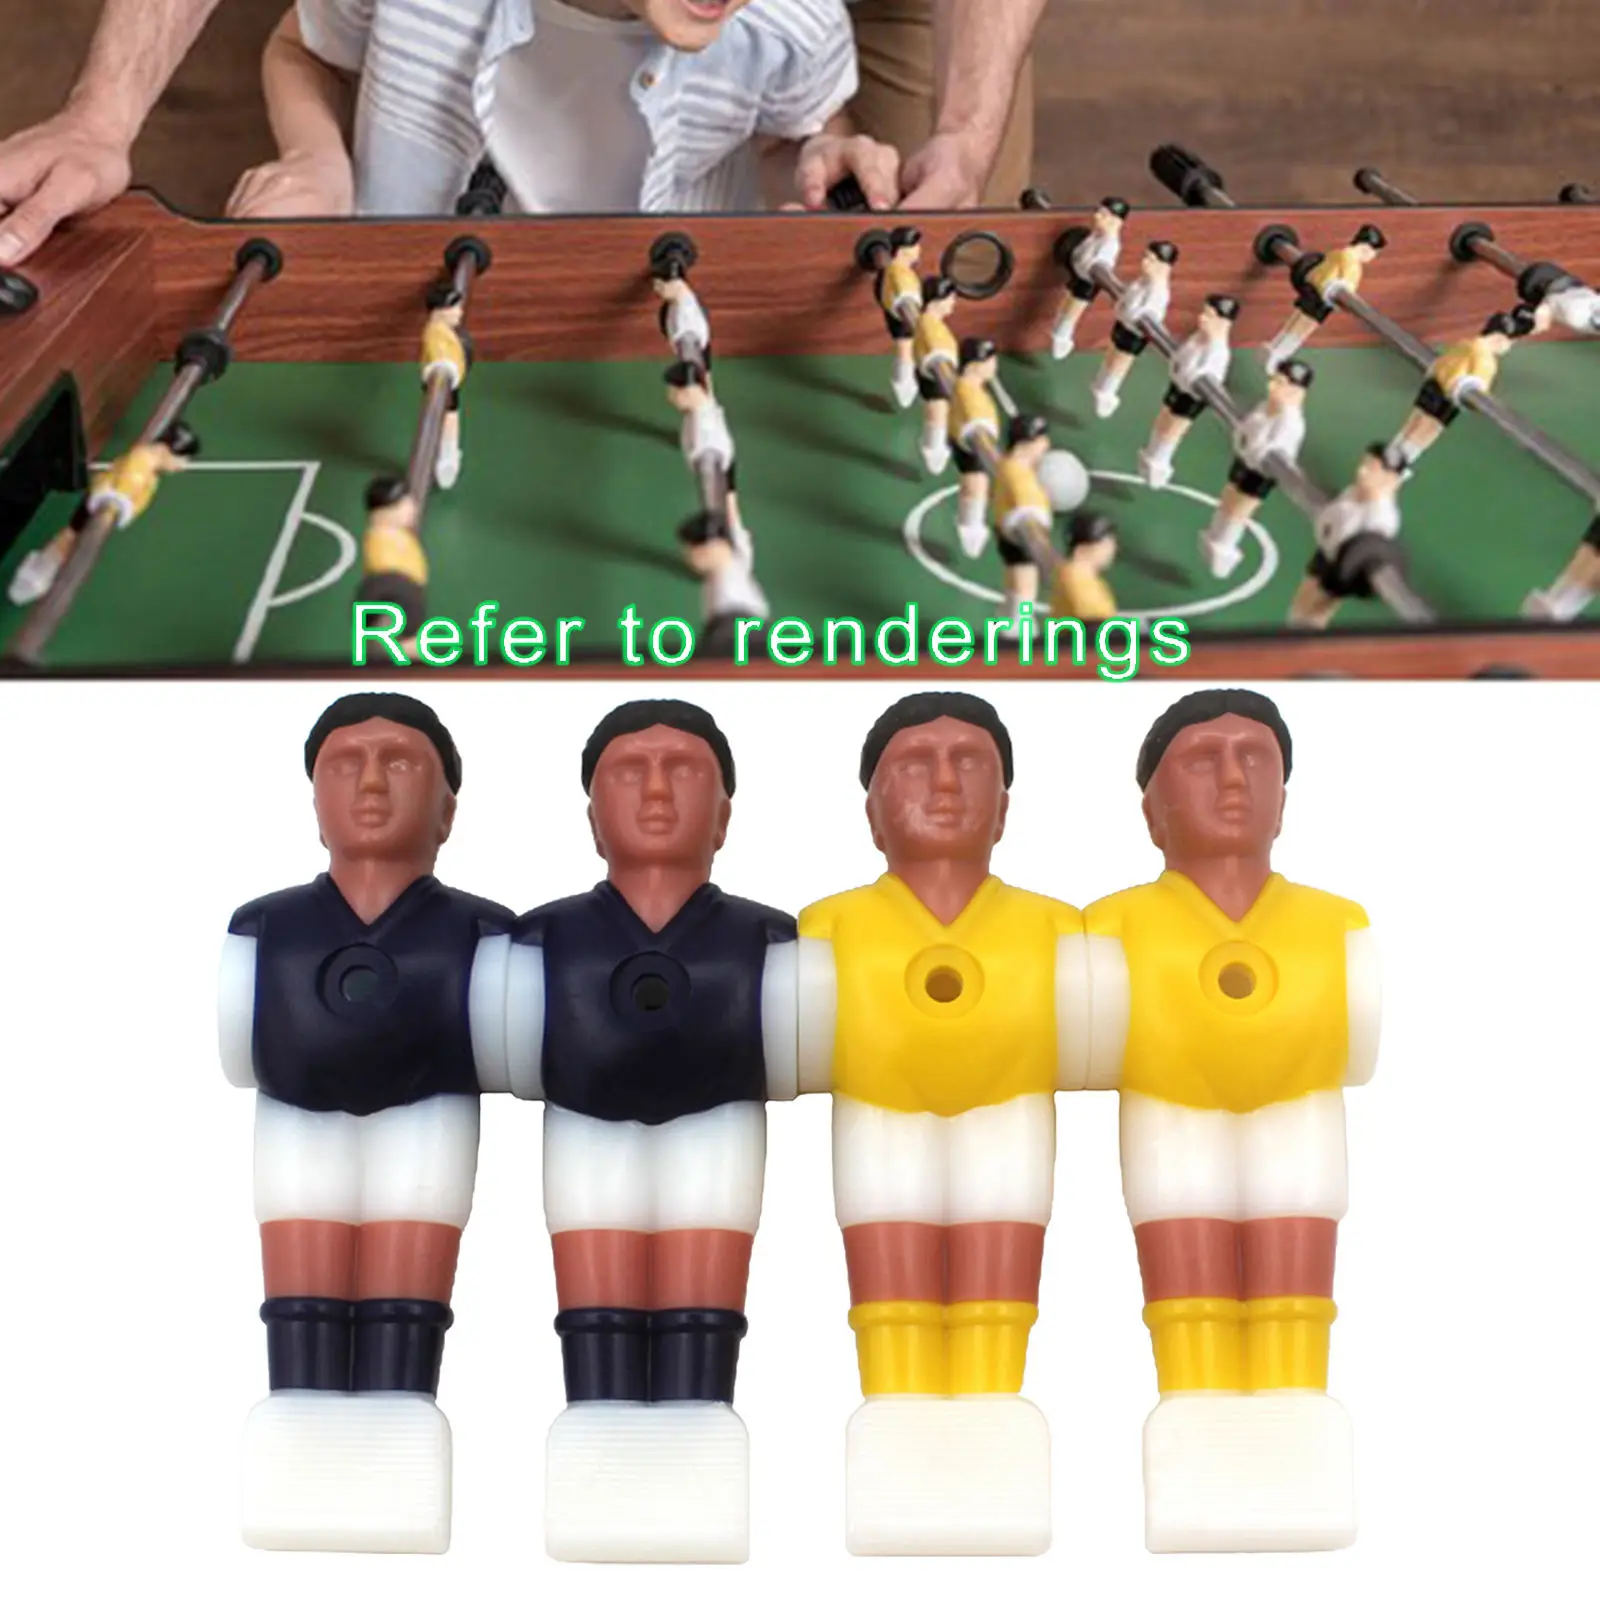 4x Foosball Men Soccer Table Guys Football Accessory 2 yellow 2 purple Soccer Player Man Replacements Set Table Parts